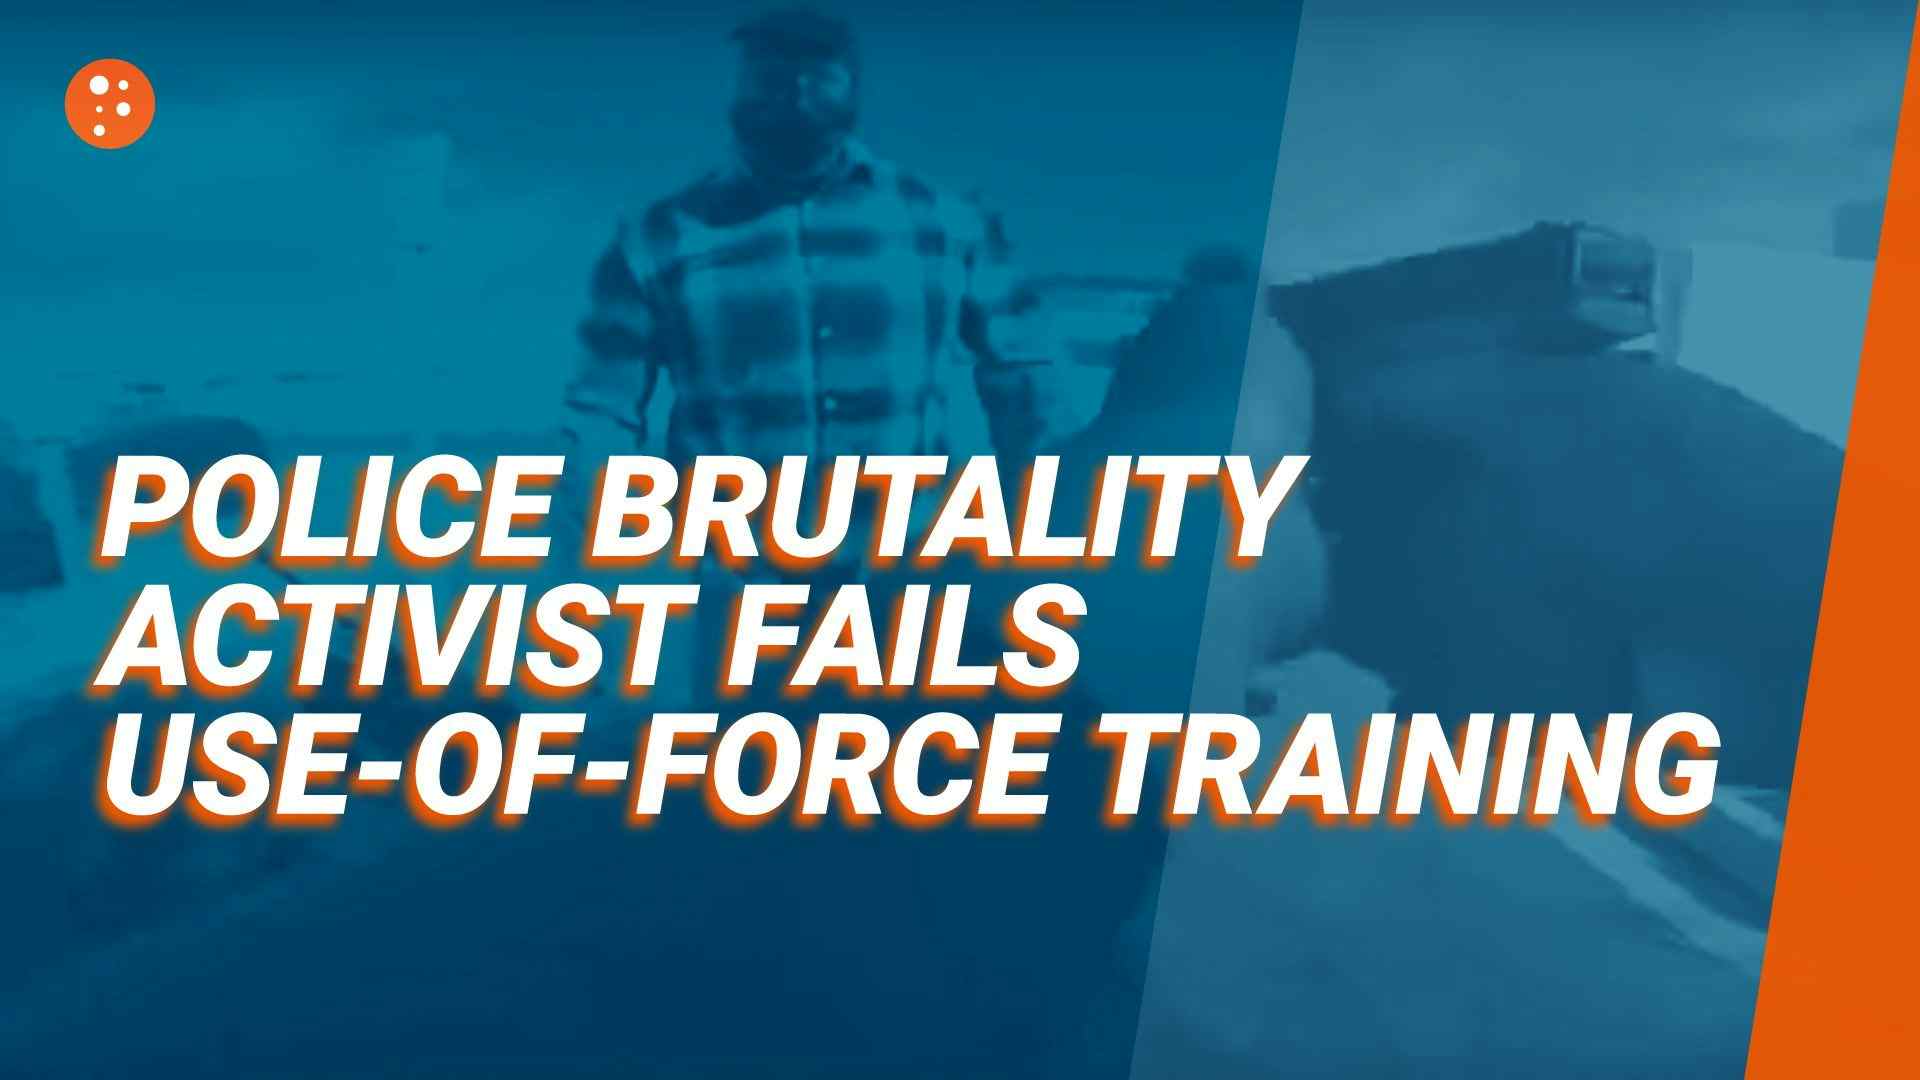 Police Brutality Activist Fails Use-of-Force Training